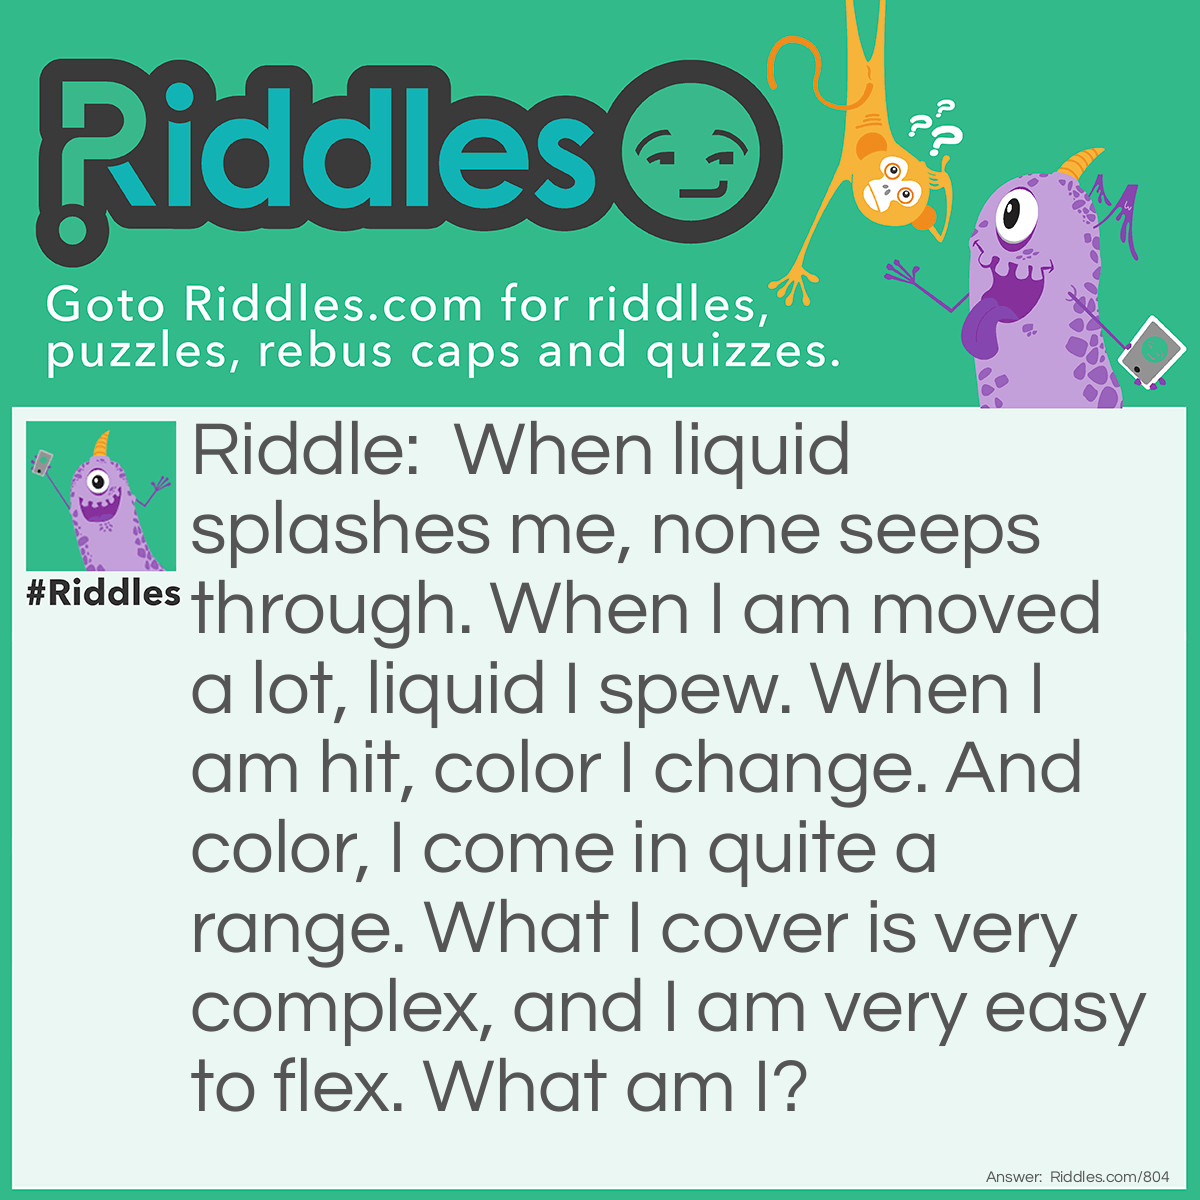 Riddle: When liquid splashes me, none seeps through. When I am moved alot, liquid I spew. When I am hit, color I change. And color, I come in quite a range. What I cover is very complex, and I am very easy to flex. What am I? Answer: I'm skin!